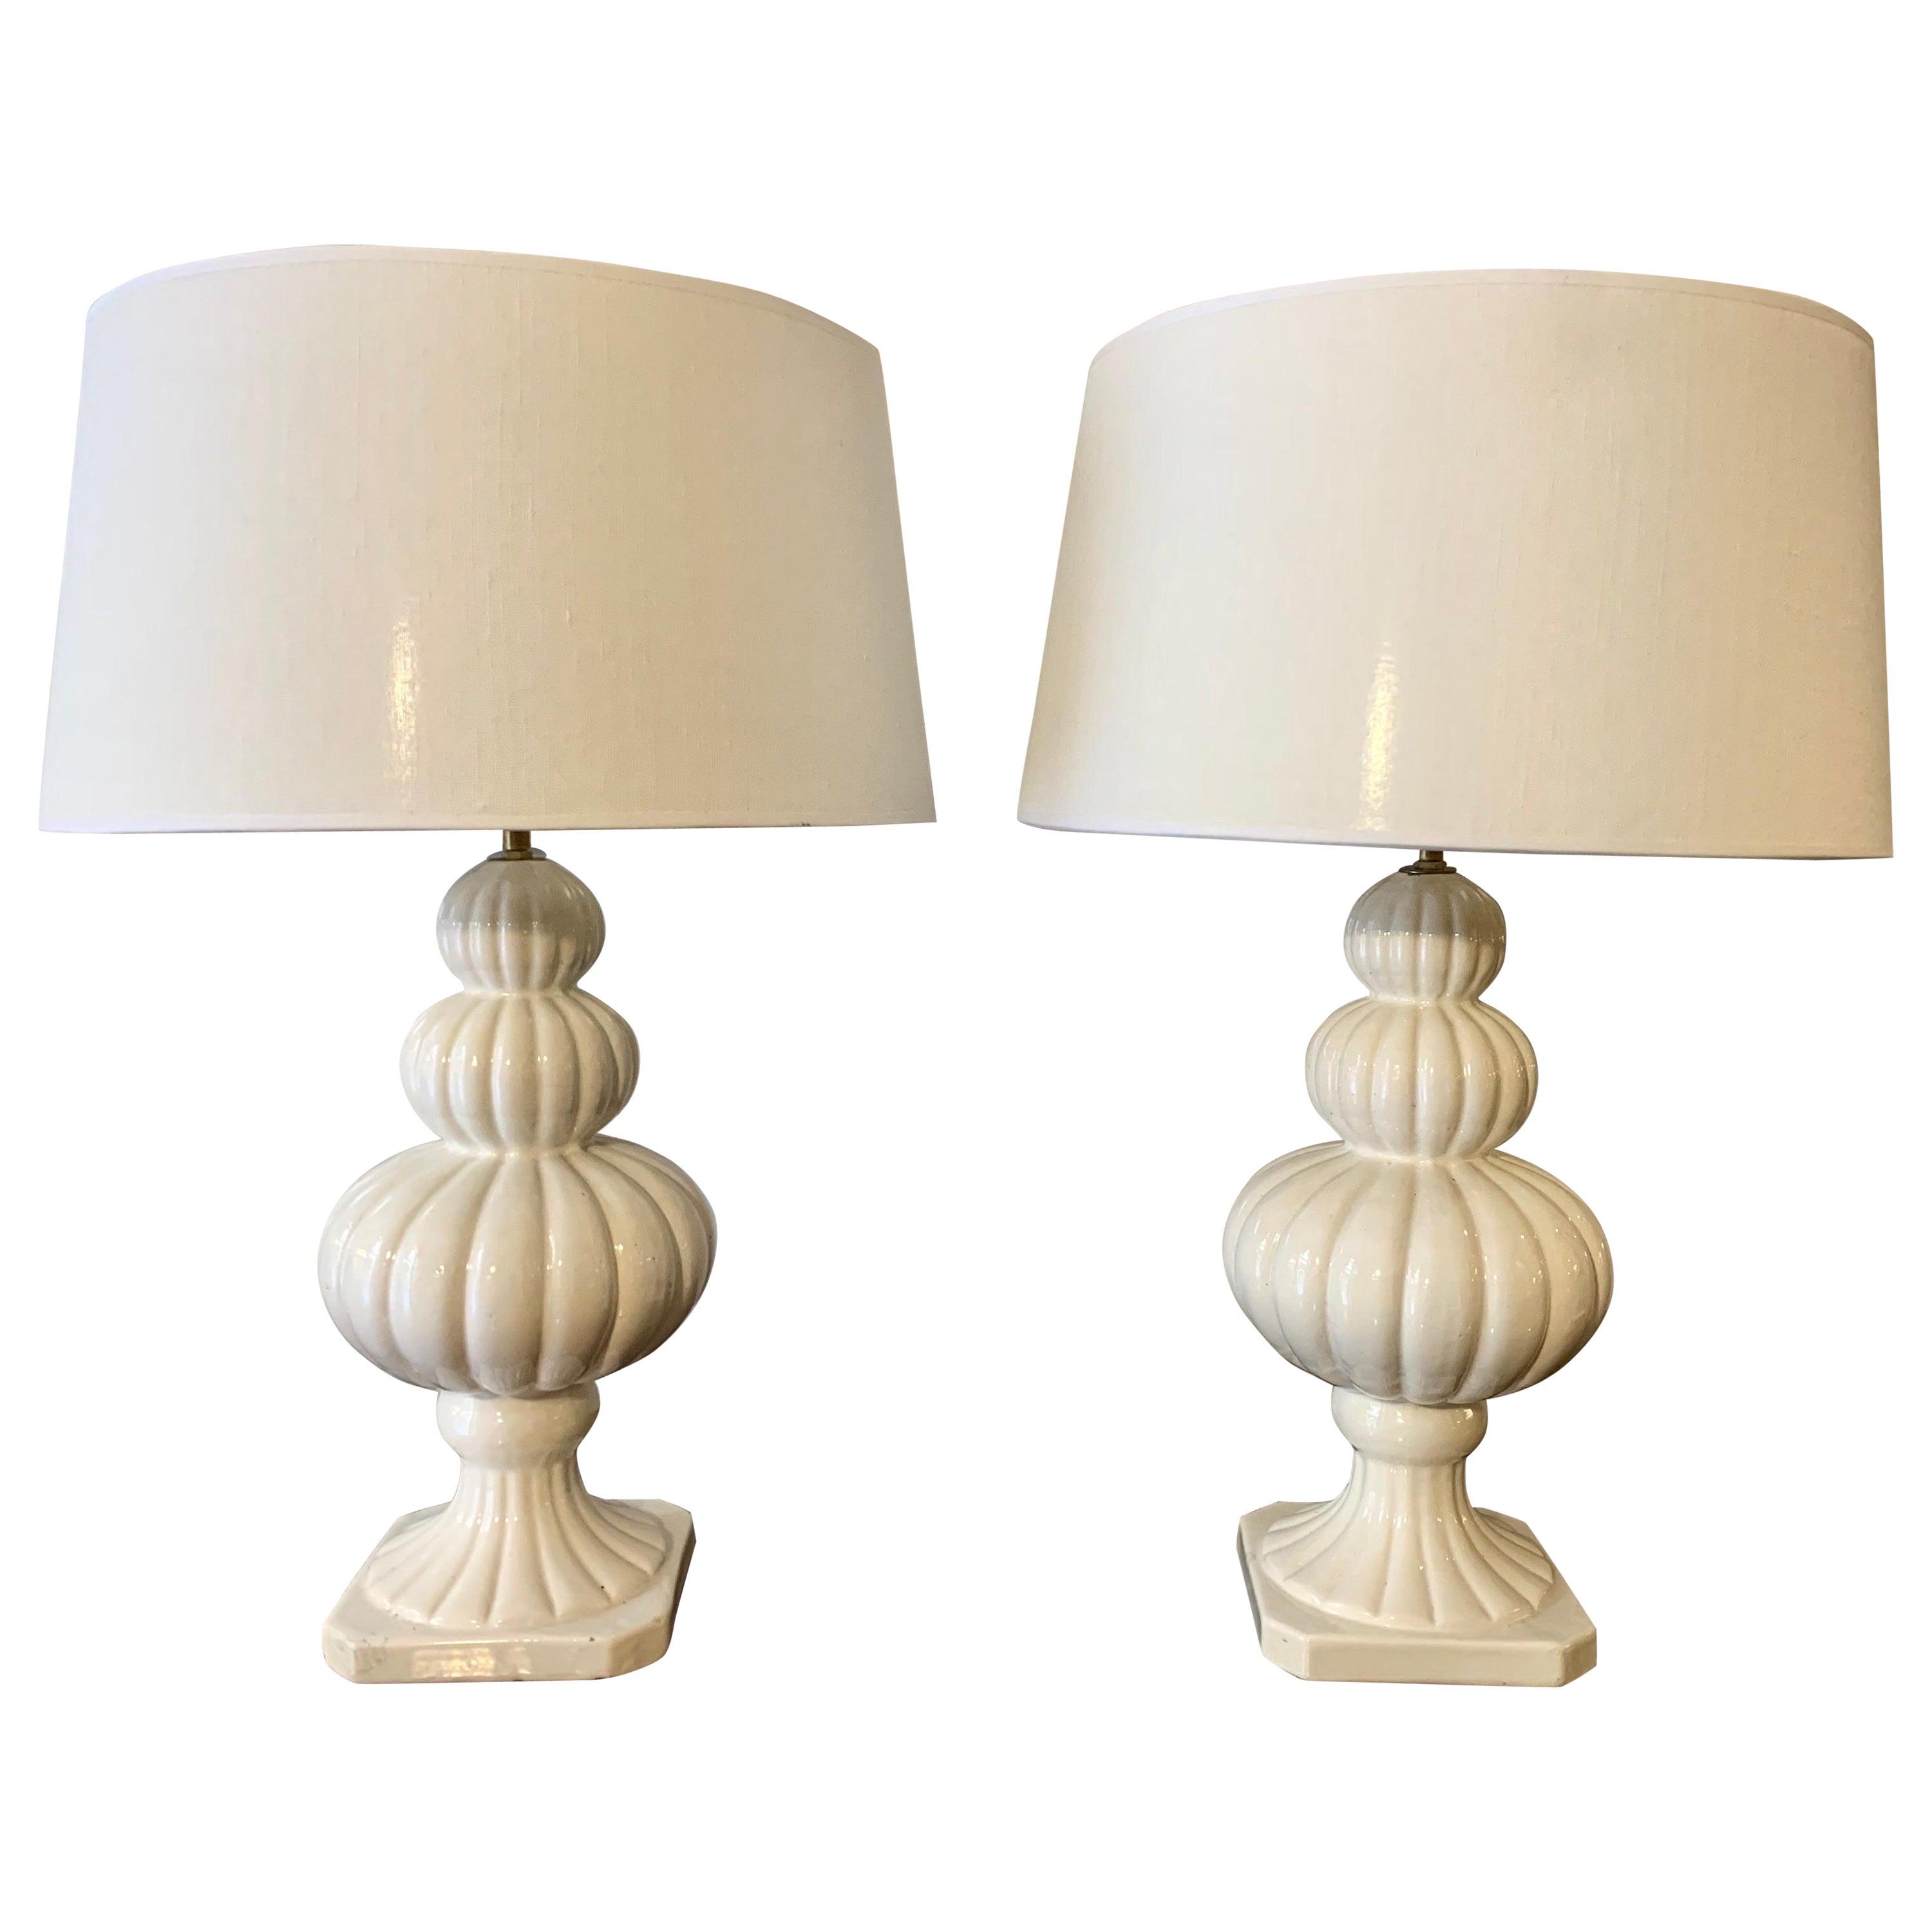 20th Midcentury Spanish Whithe Porcelain Table Lamps For Sale